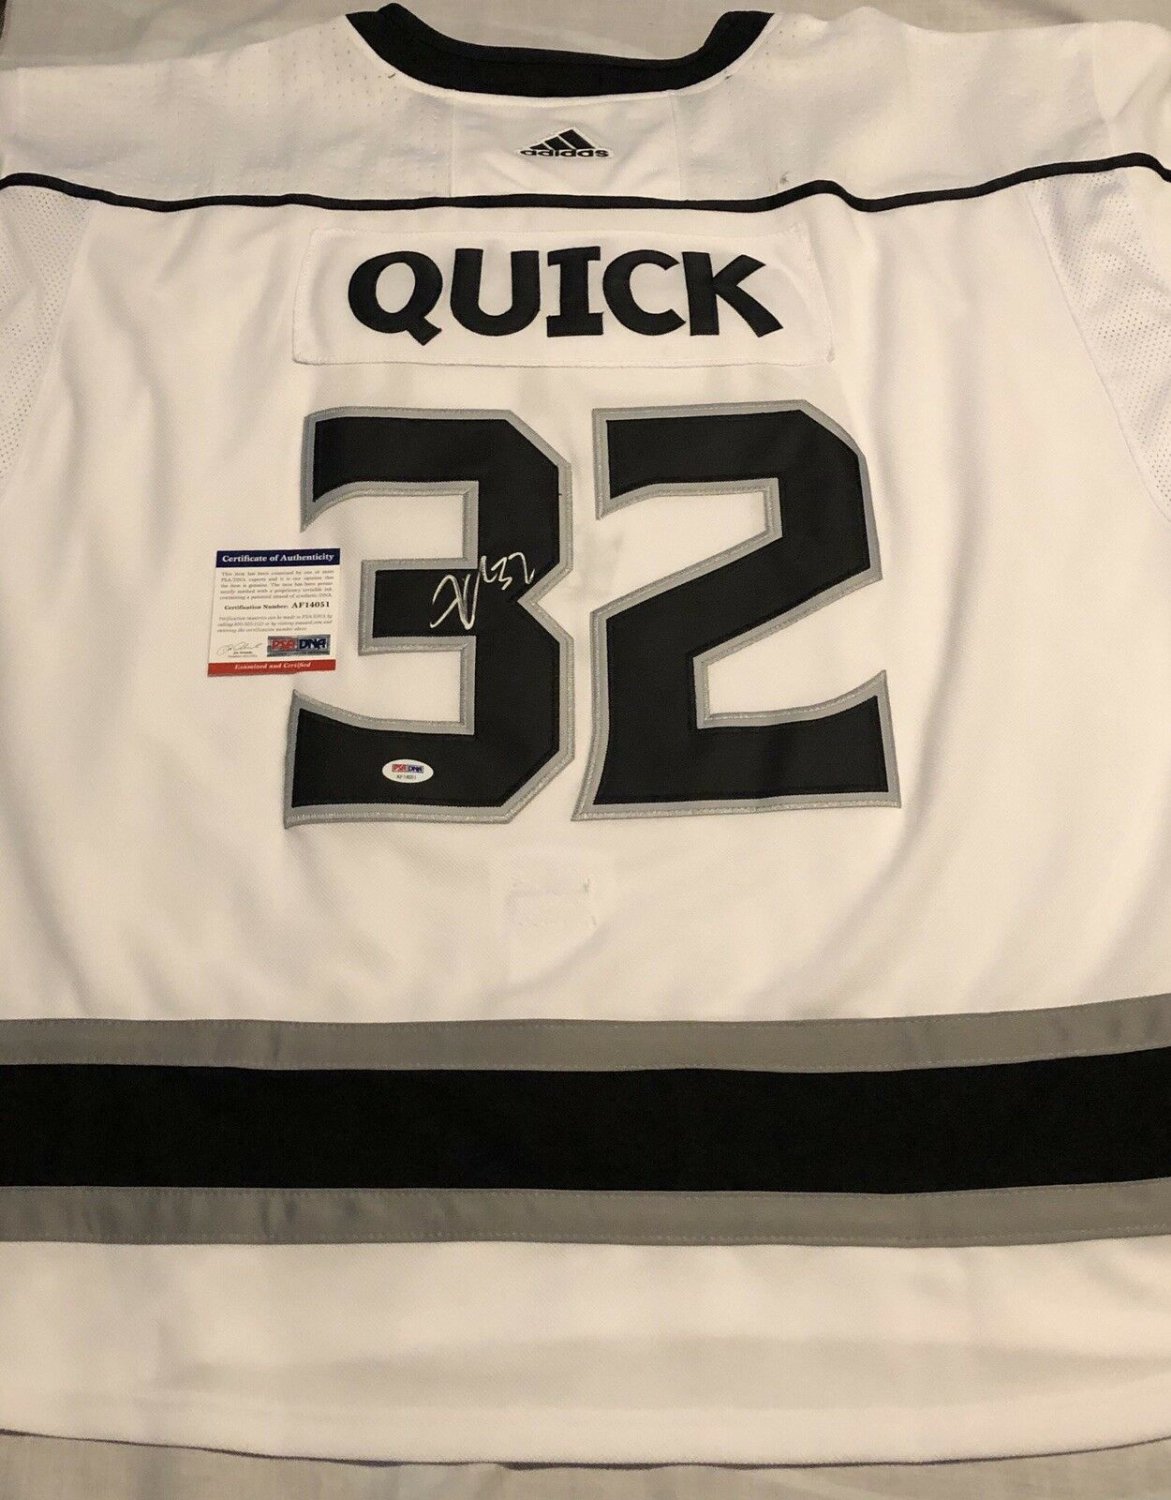 jonathan quick autographed jersey